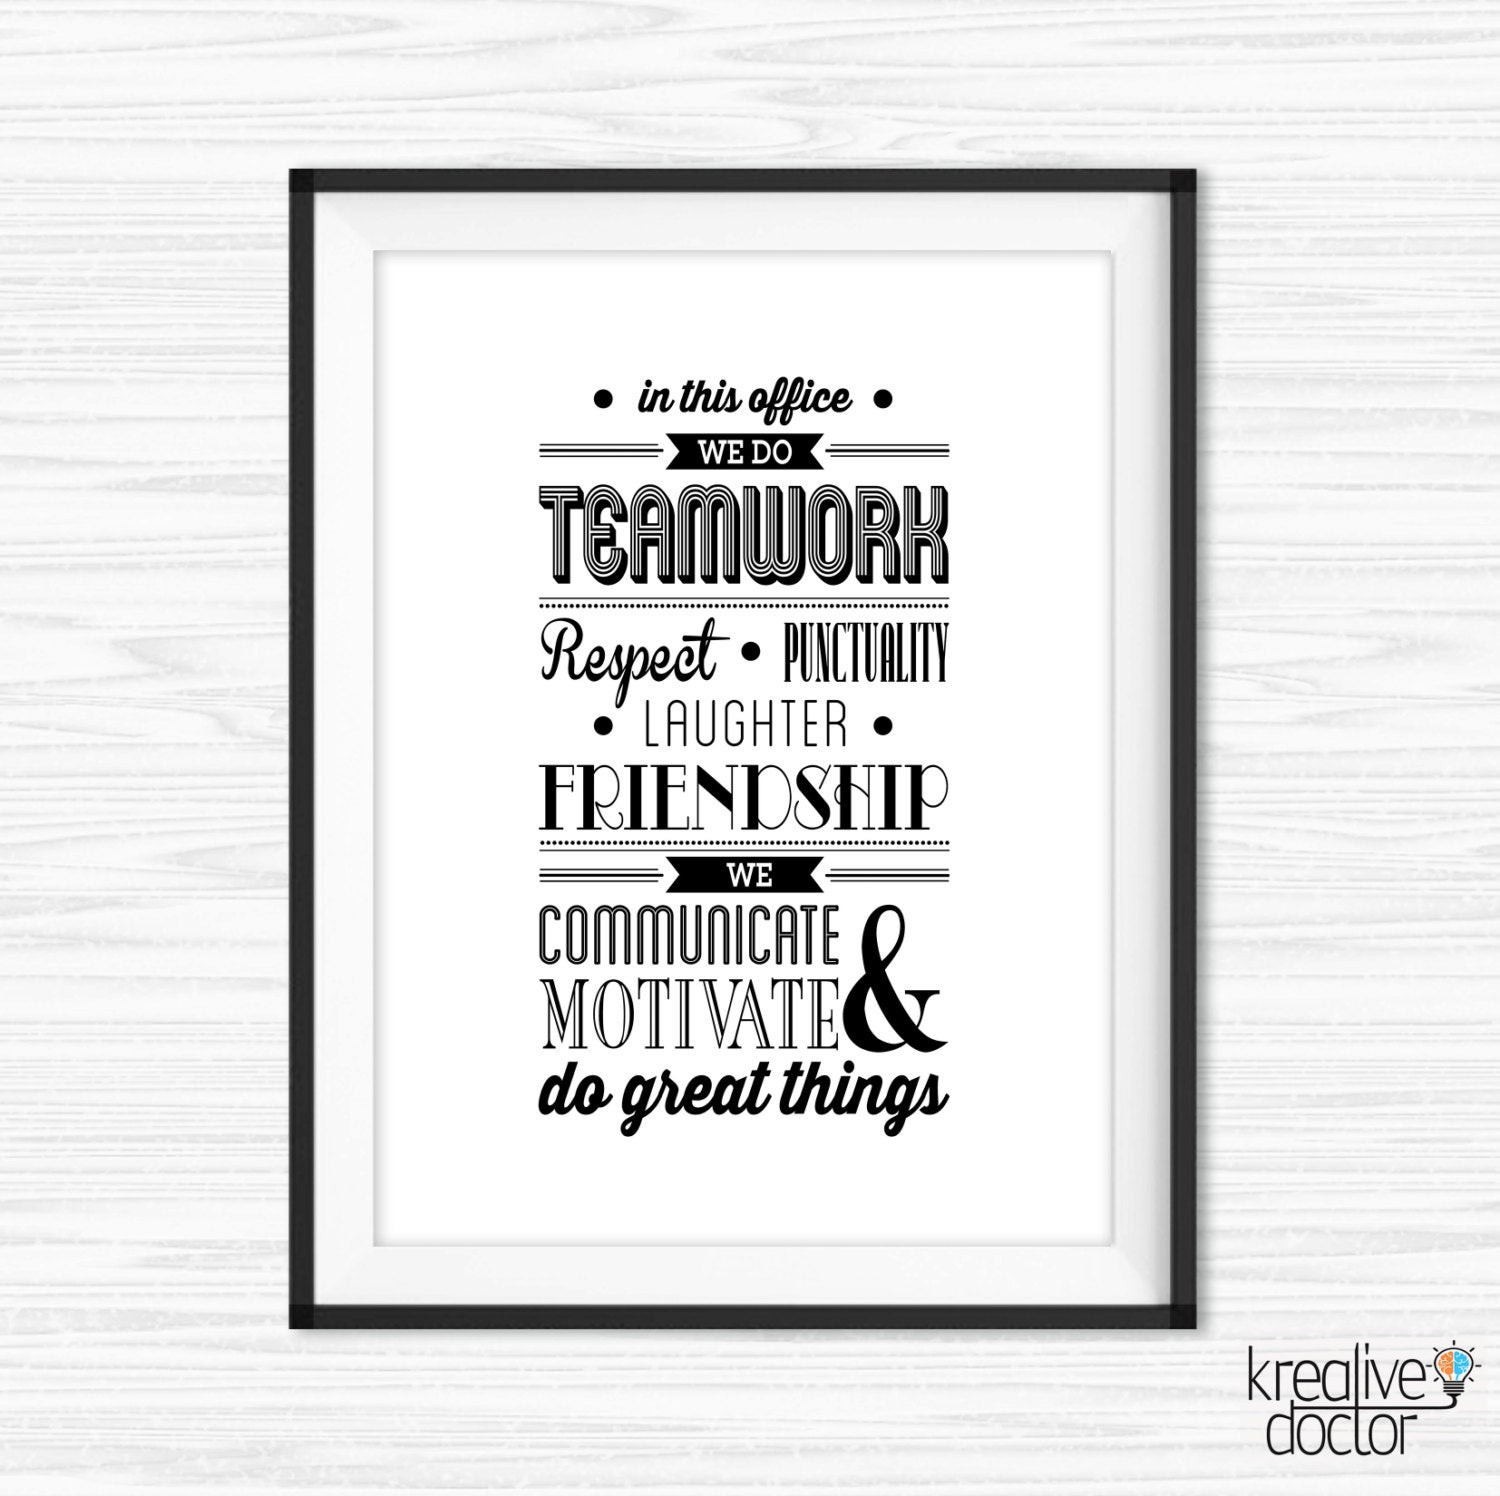 Inspirational Office Quote
 Teamwork Quotes for fice In this fice Quote Inspirational